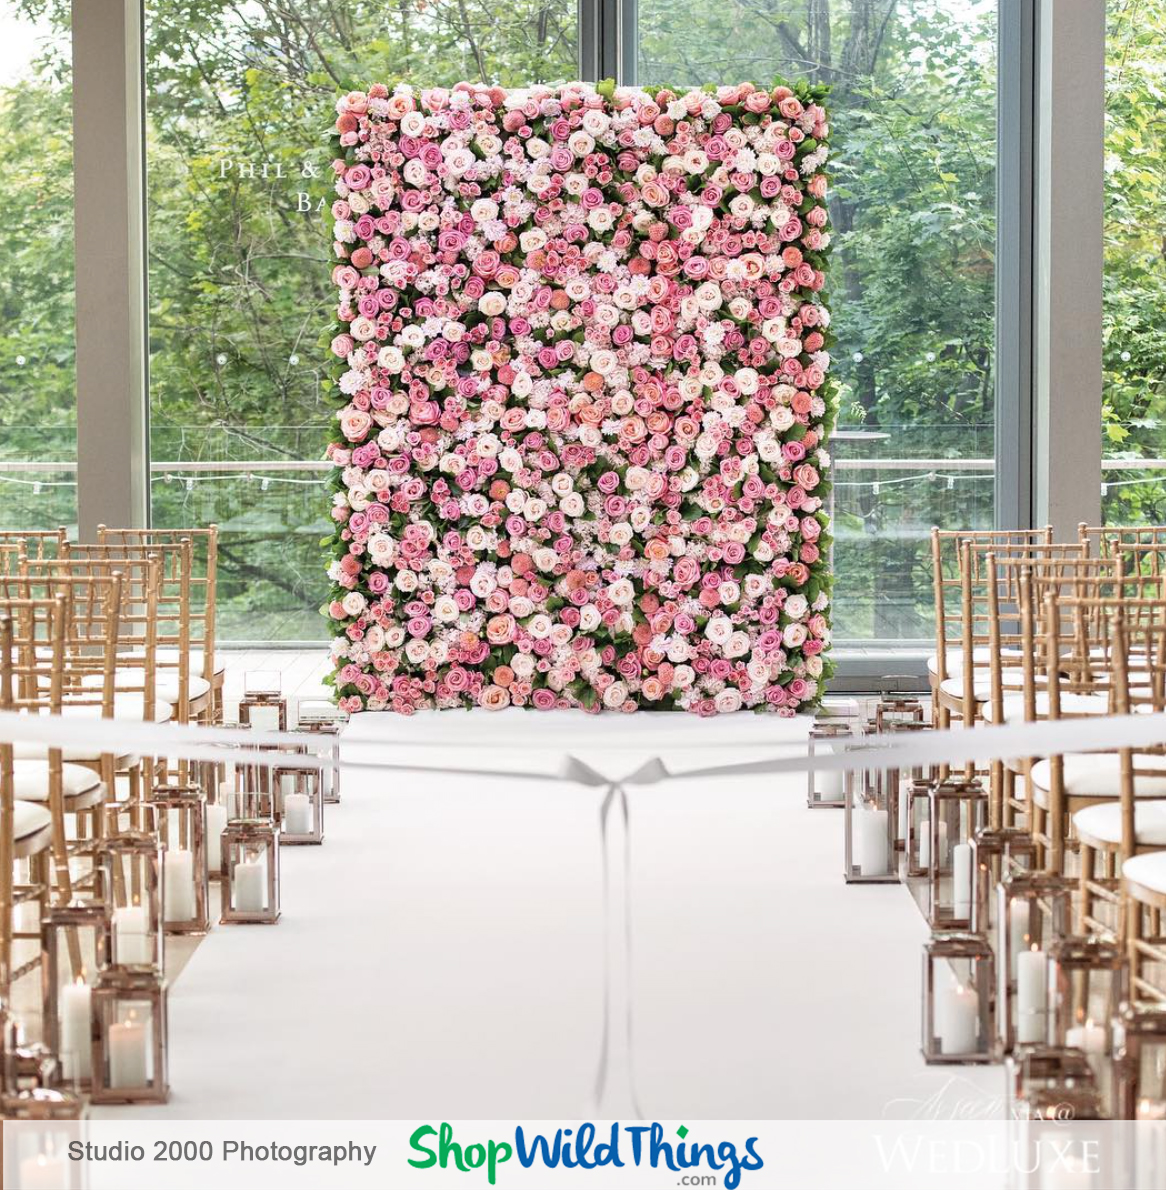 Spectacular Silks:  Using Faux Florals Effectively in Ceremonies and Receptions